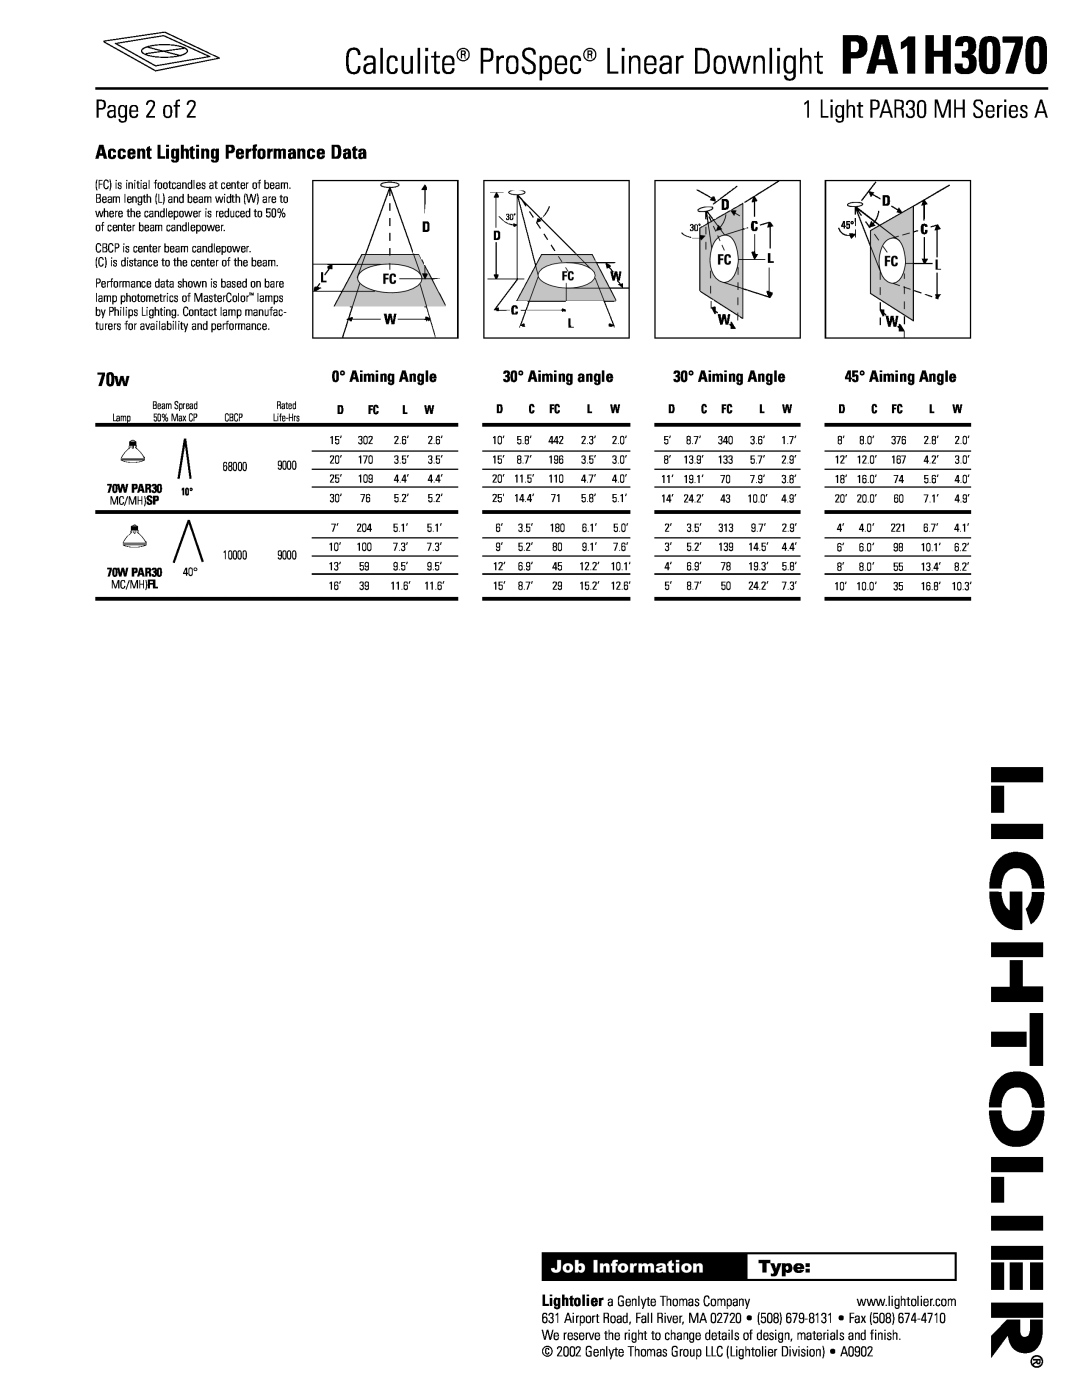 Lightolier PA1H3070 Page 2 of, Accent Lighting Performance Data, Aiming Angle, Aiming angle, Light PAR30 MH Series A, Type 